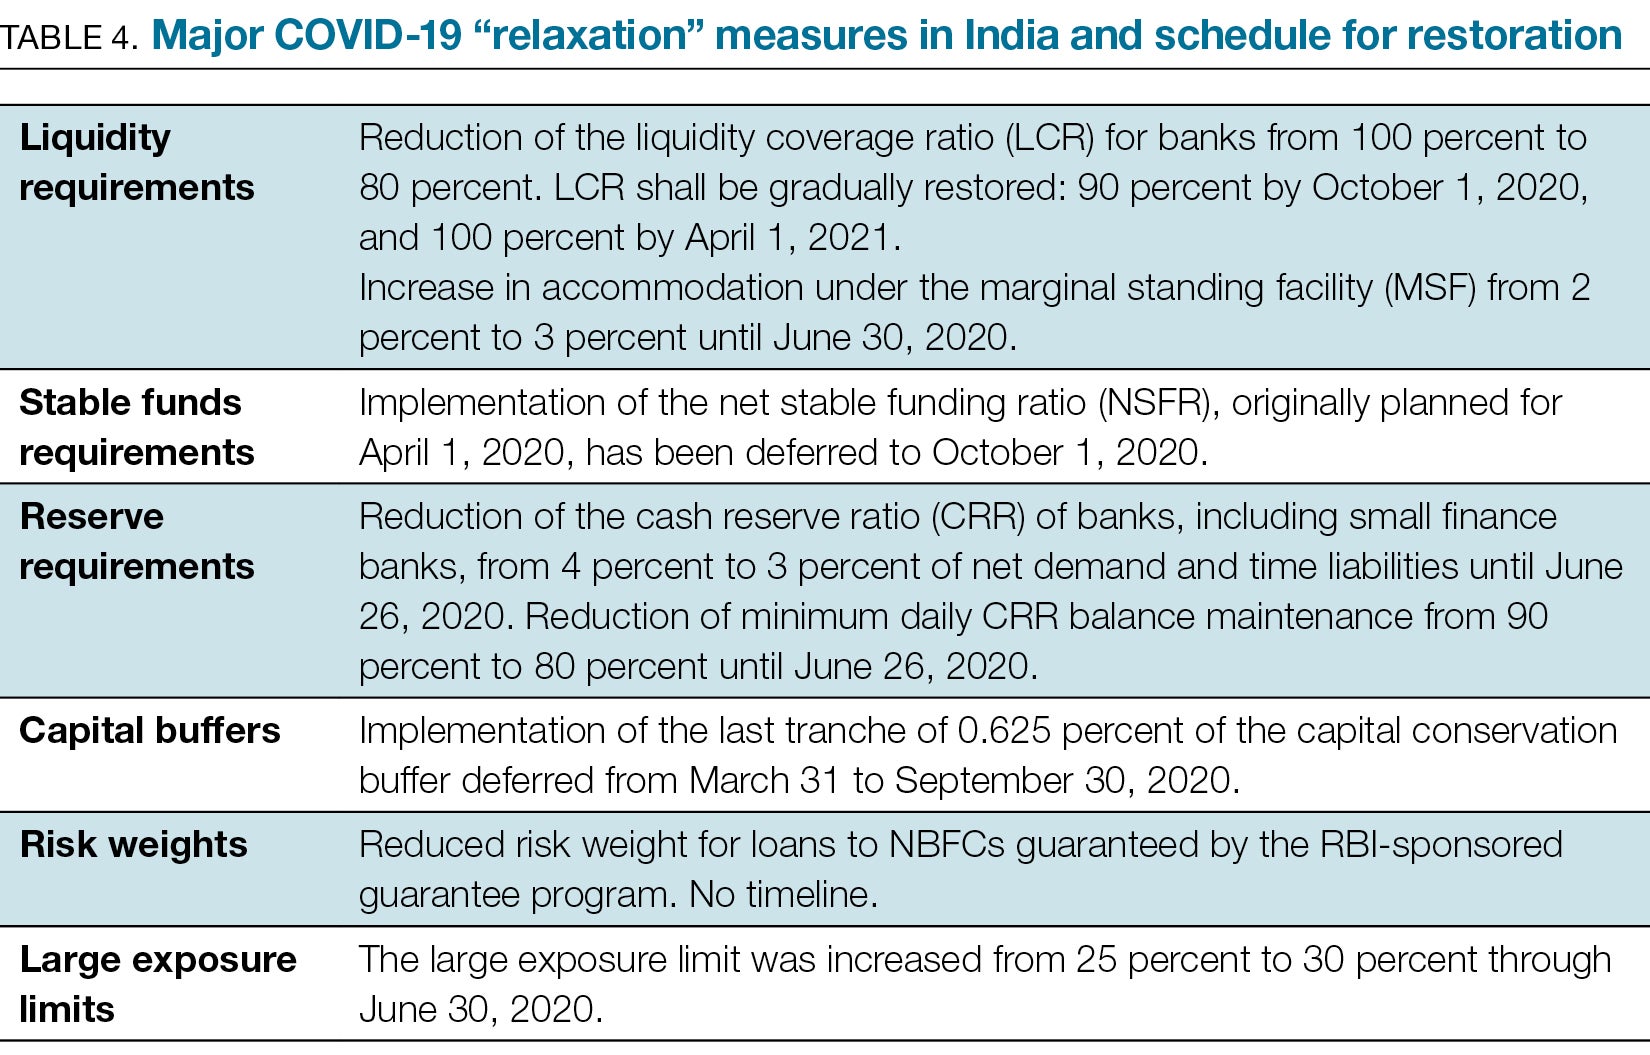 TABLE 4. Major COVID-19 “relaxation” measures in India and schedule for restoration